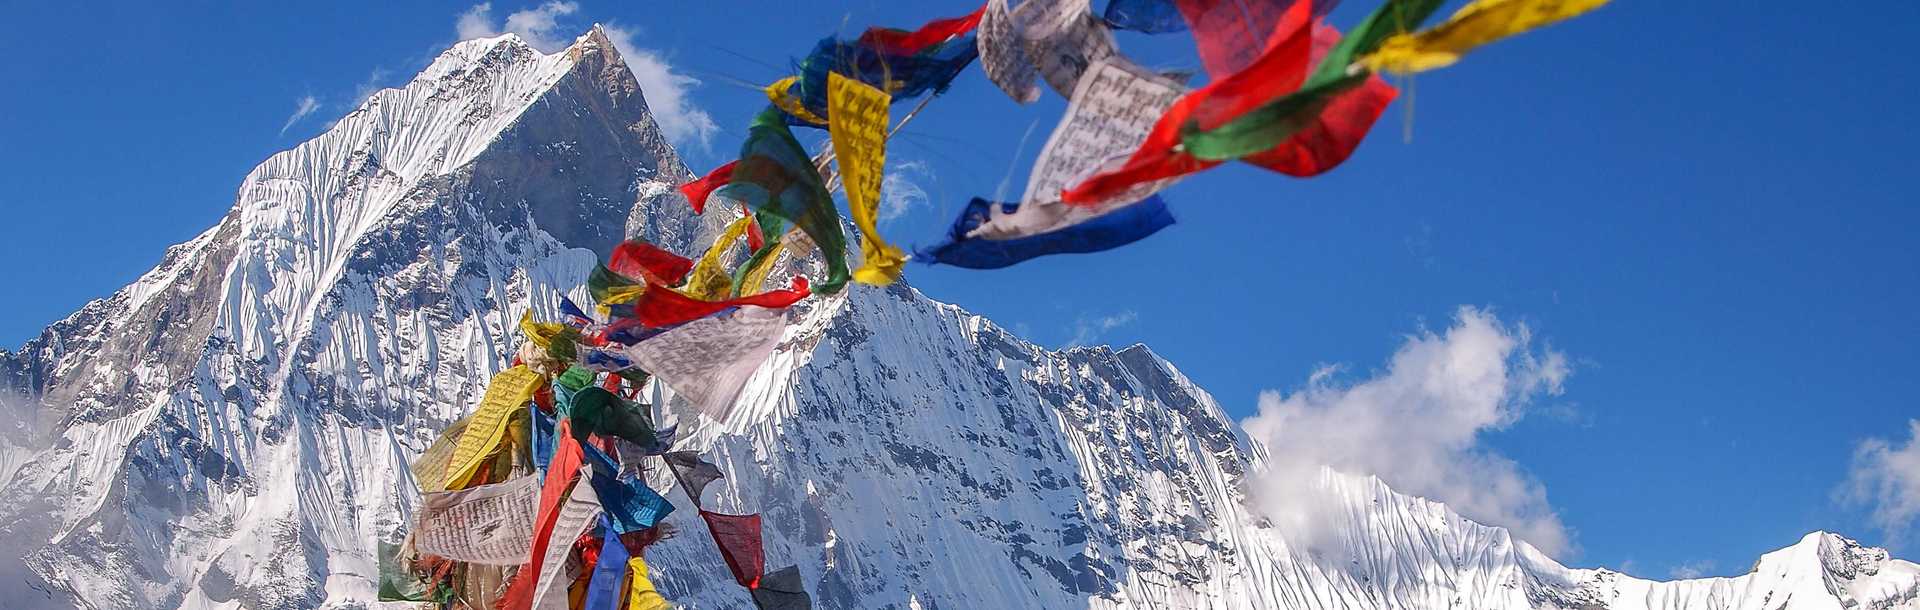 Prayer flags near the summit in the Himalayas of Nepal.